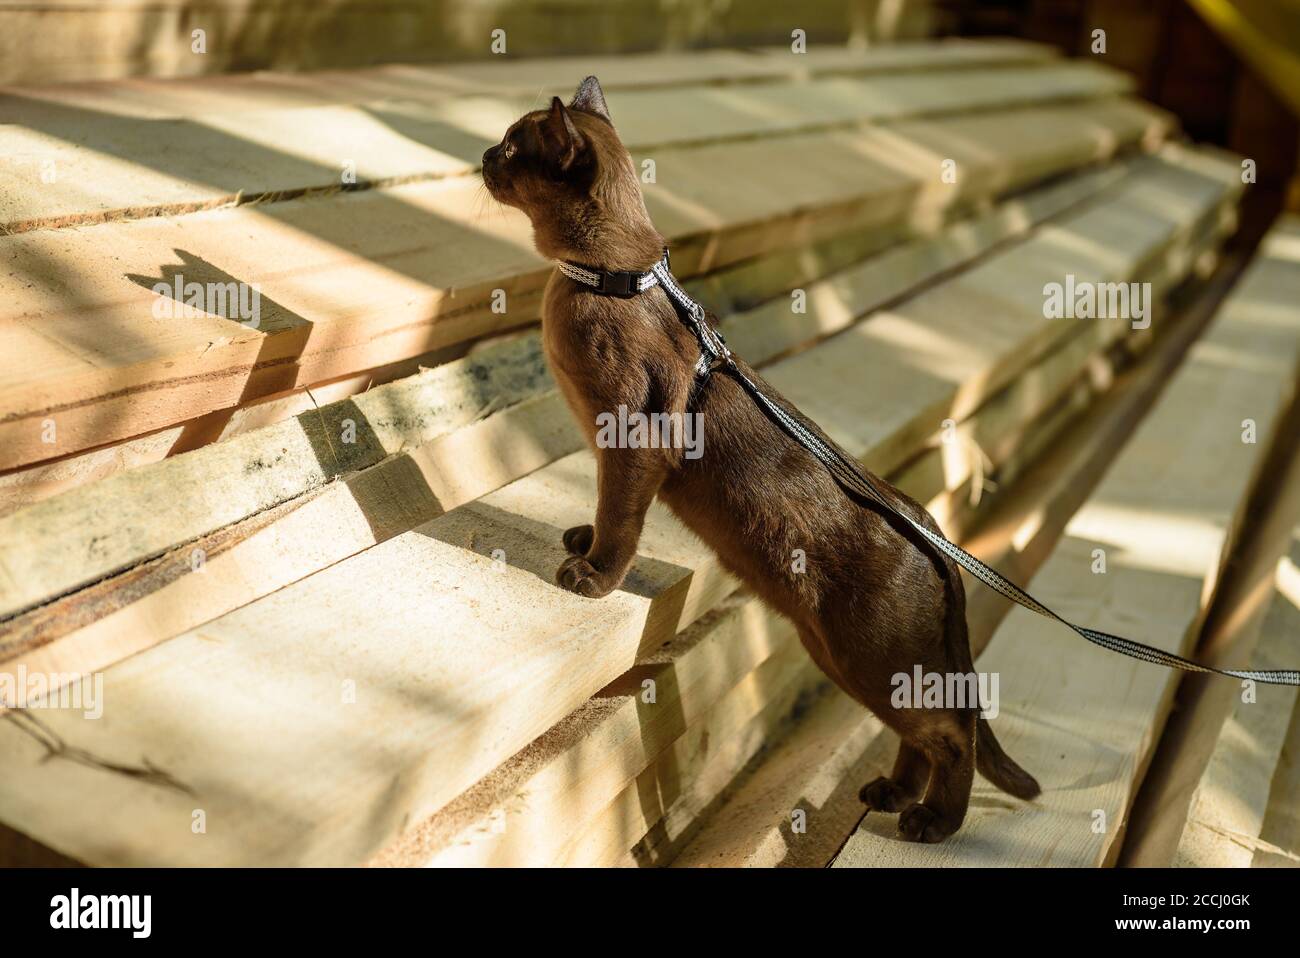 Burma cat with leash walking on lumber, playful collared pet looks at wood planks outdoor. Burmese kitten wearing harness is on building materials, yo Stock Photo